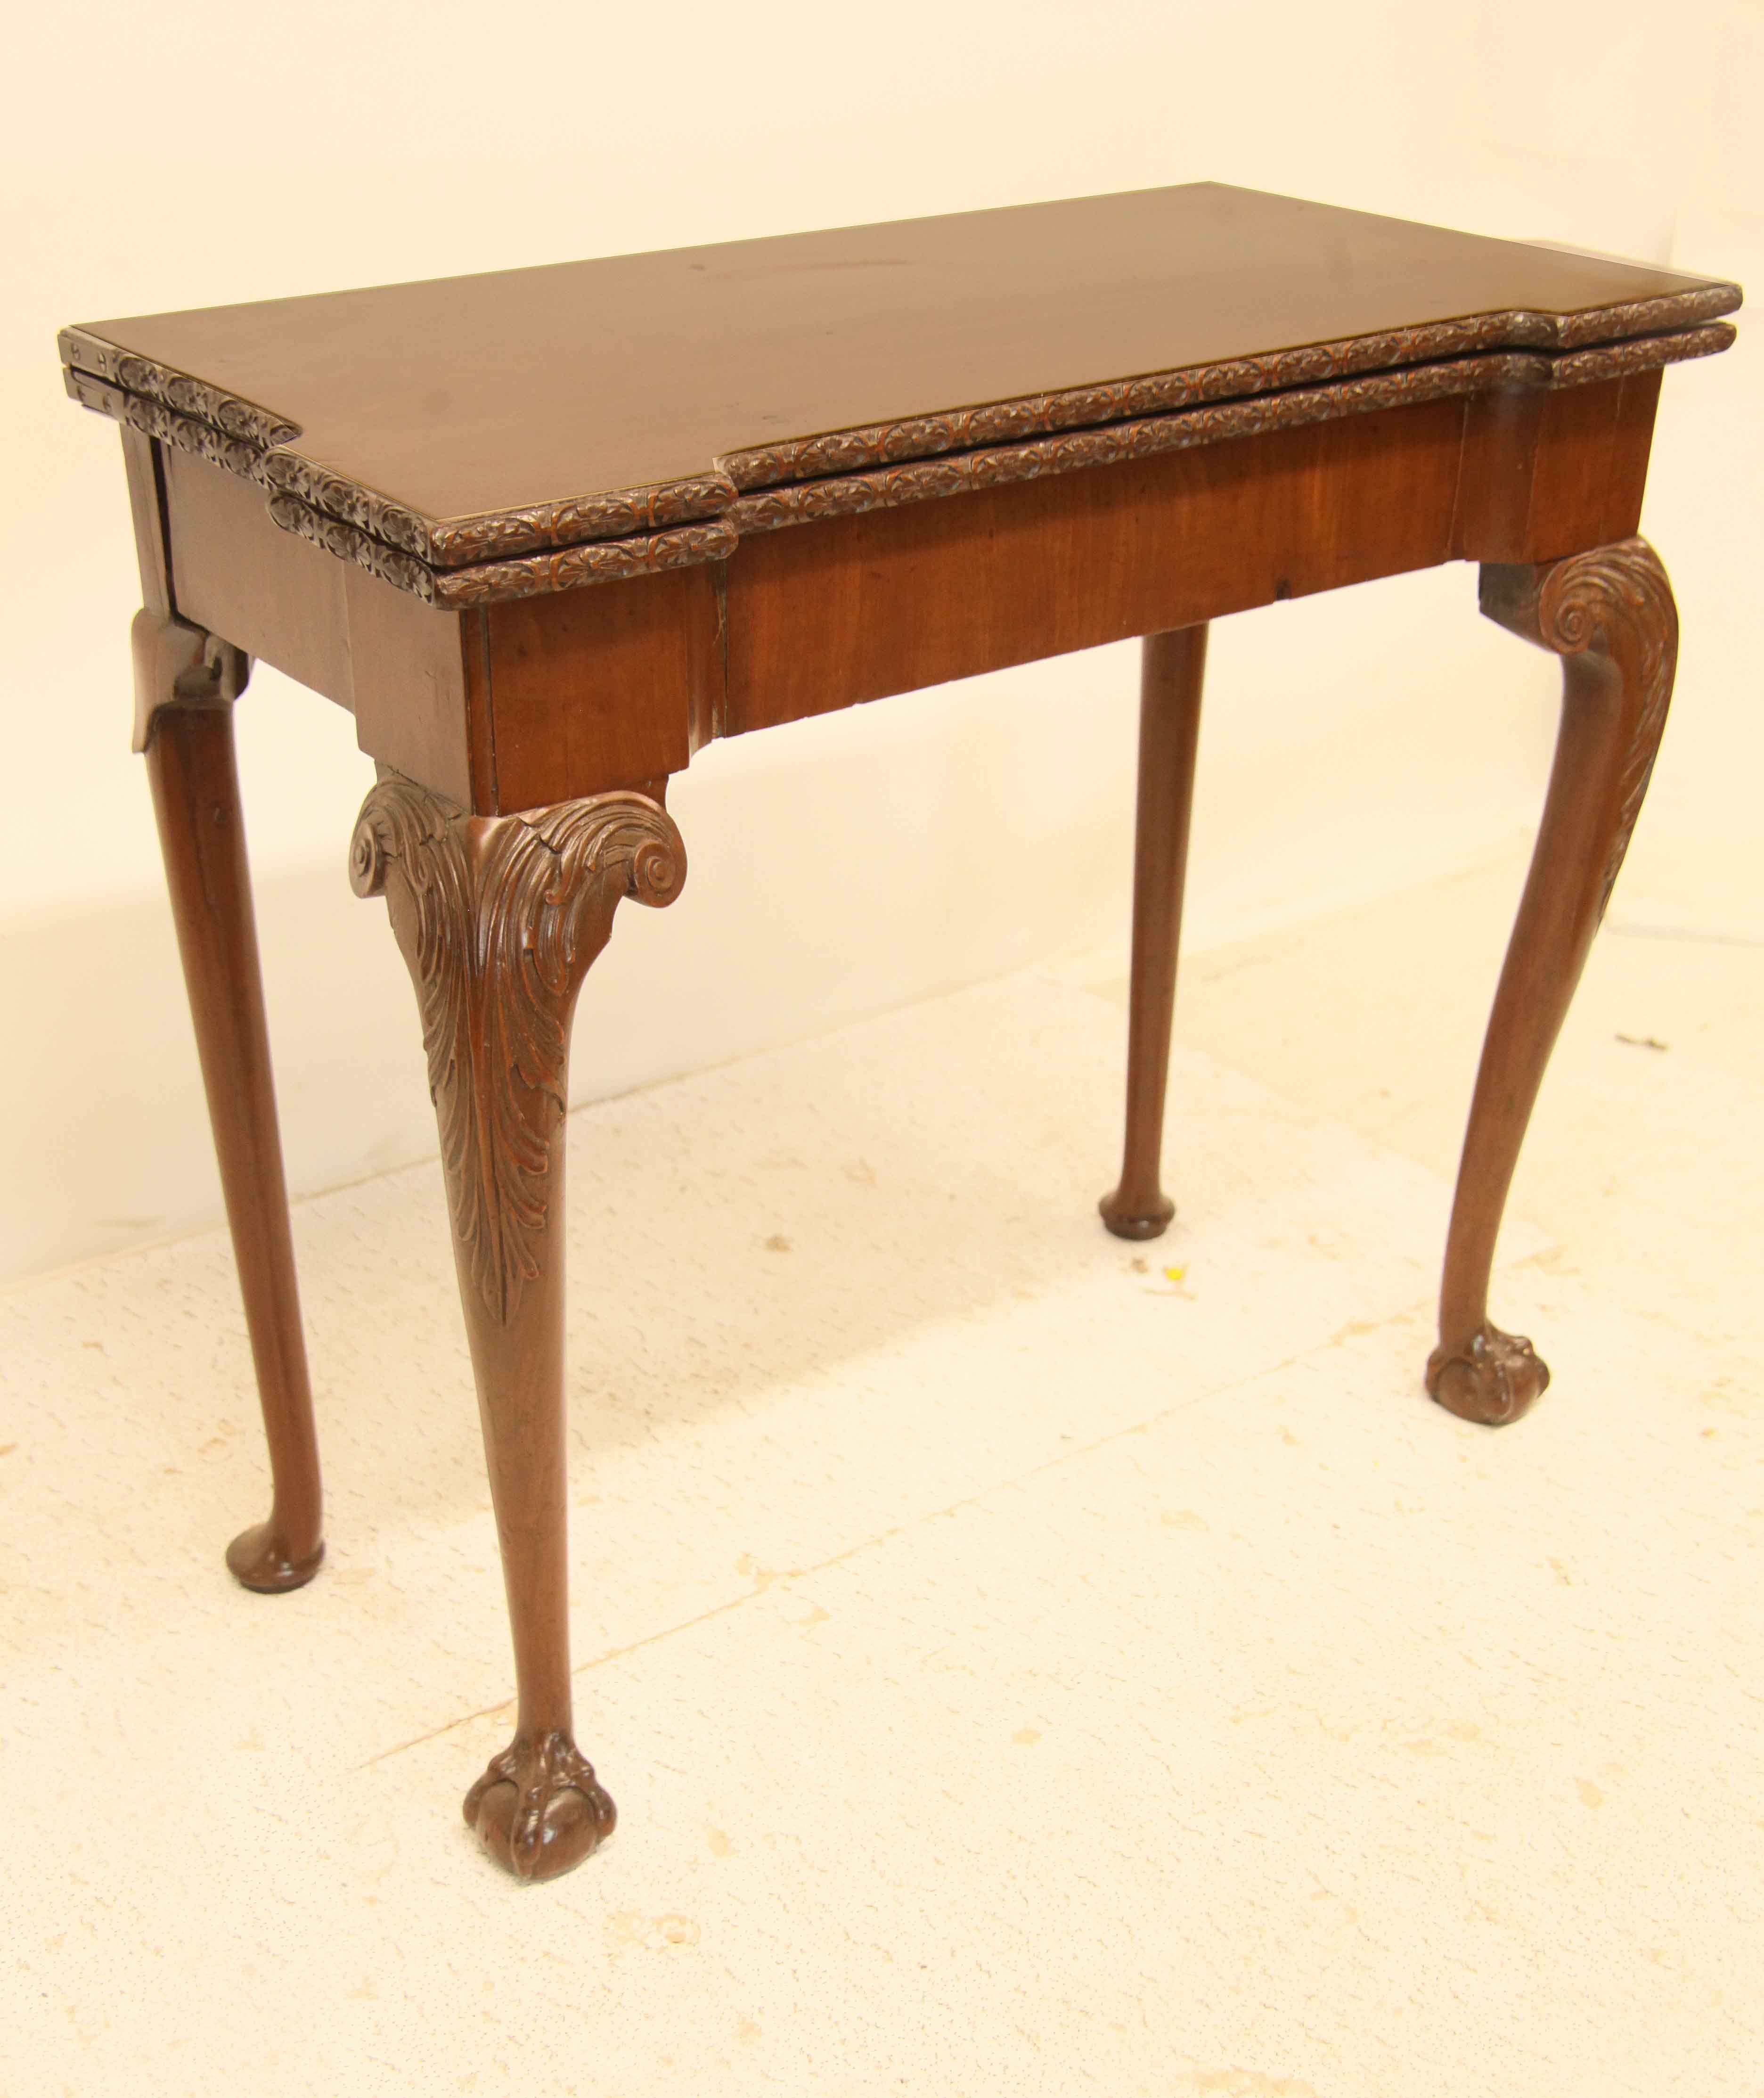 Irish Chippendale game table, beautiful color and patina, the top with carved edge opens up to a solid wood surface, the apron has vertical mahogany veneer, front cabriole legs with elaborate acanthus carved knee and terminates with ball and claw